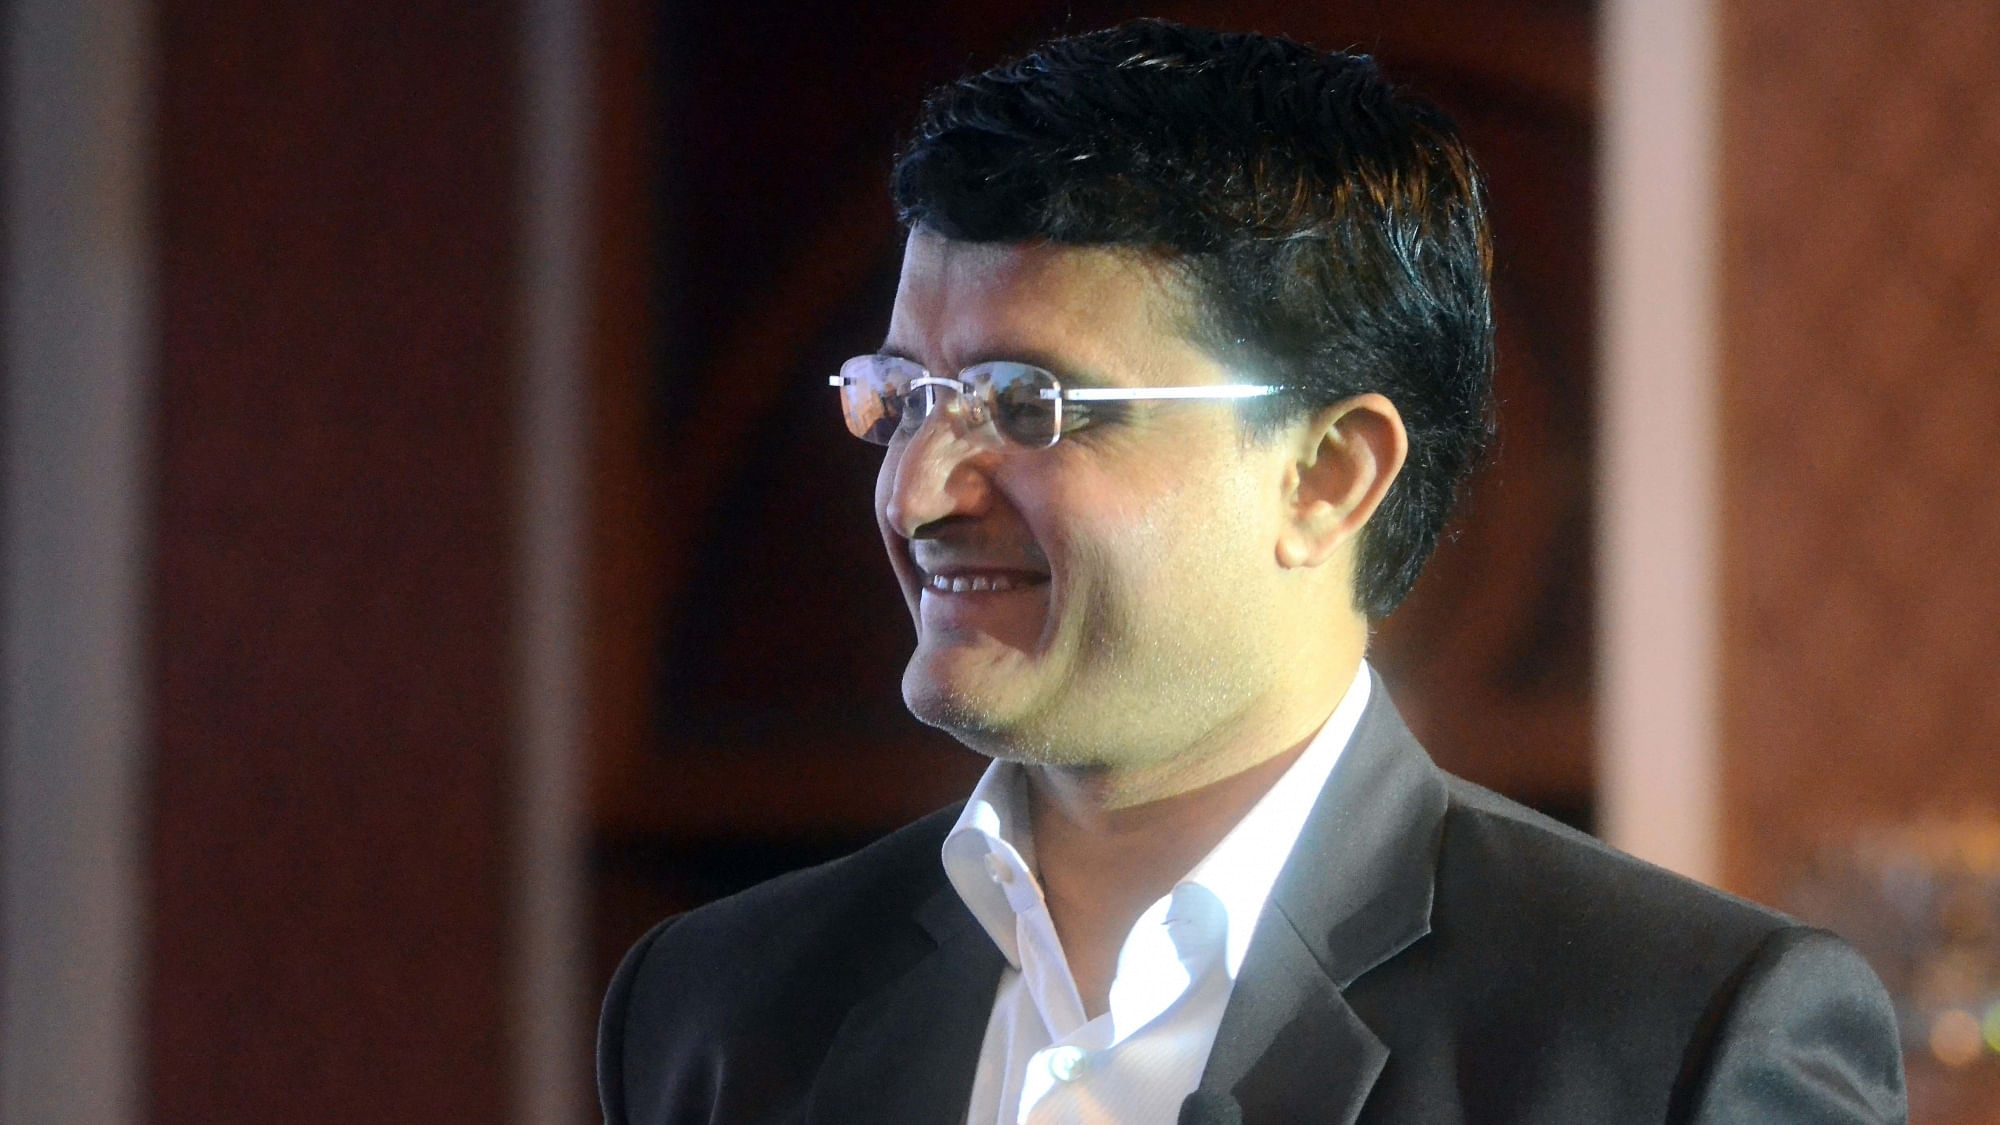 Sourav Ganguly called Ravi Shastri’s comparison of the Indian teams ‘immature’.